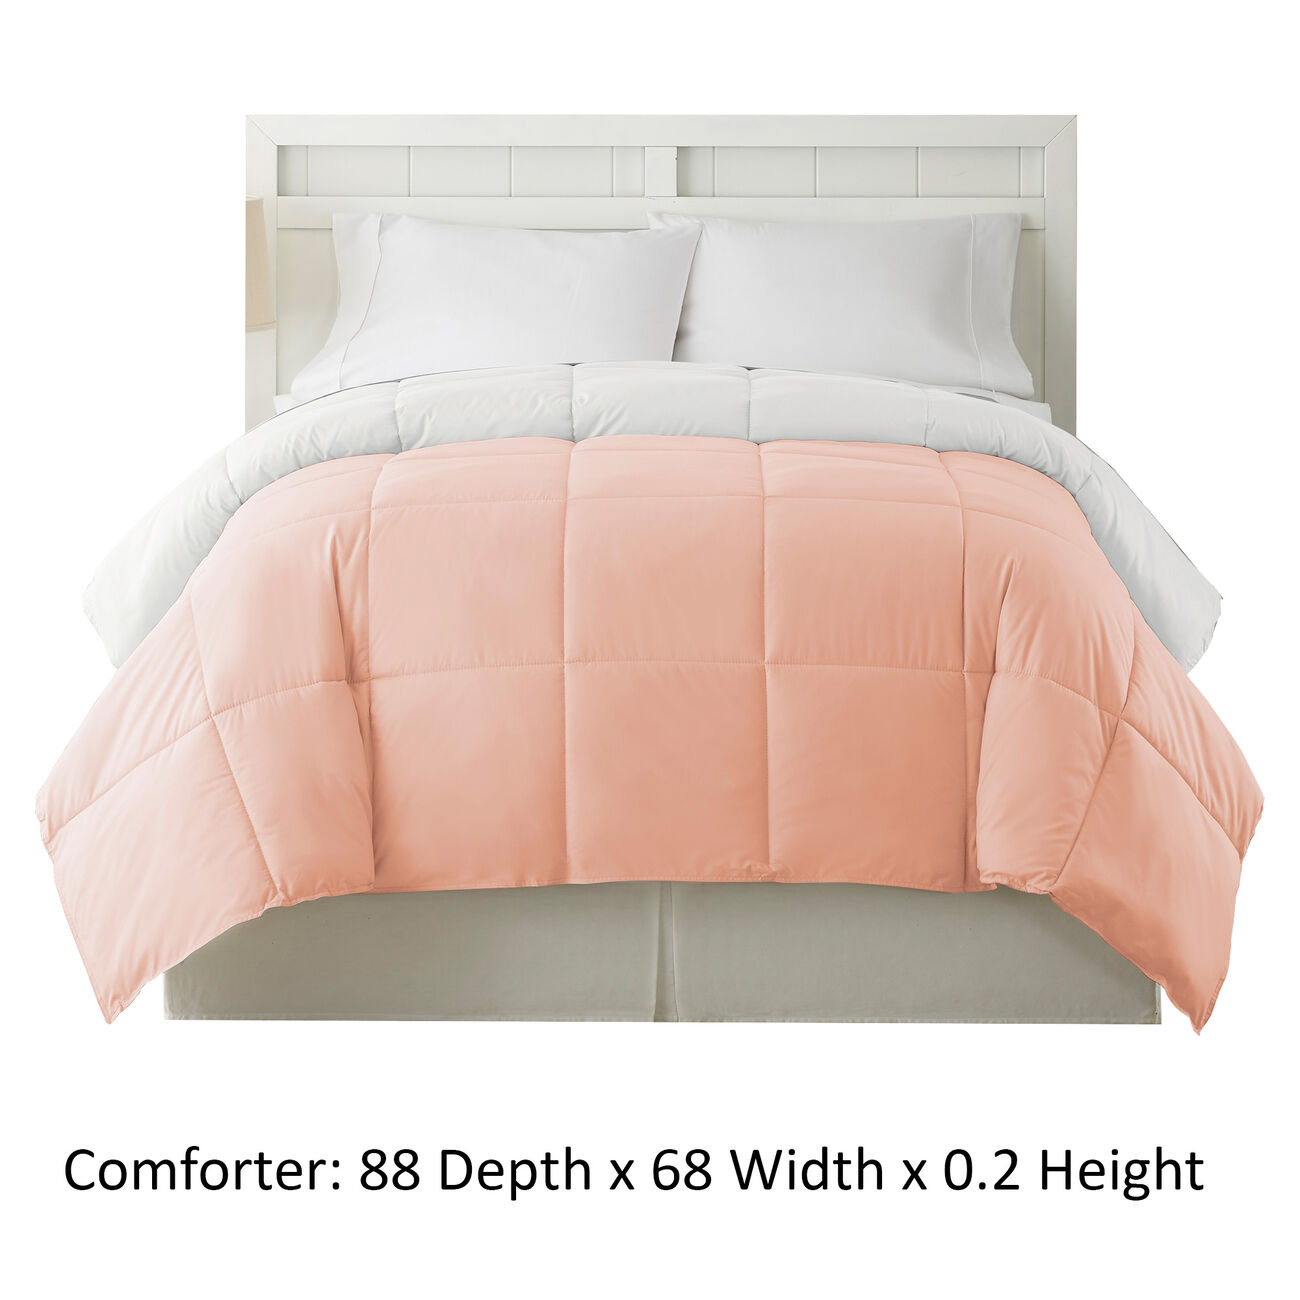 Genoa Twin Size Box Quilted Reversible Comforter The Urban Port, White and Pink